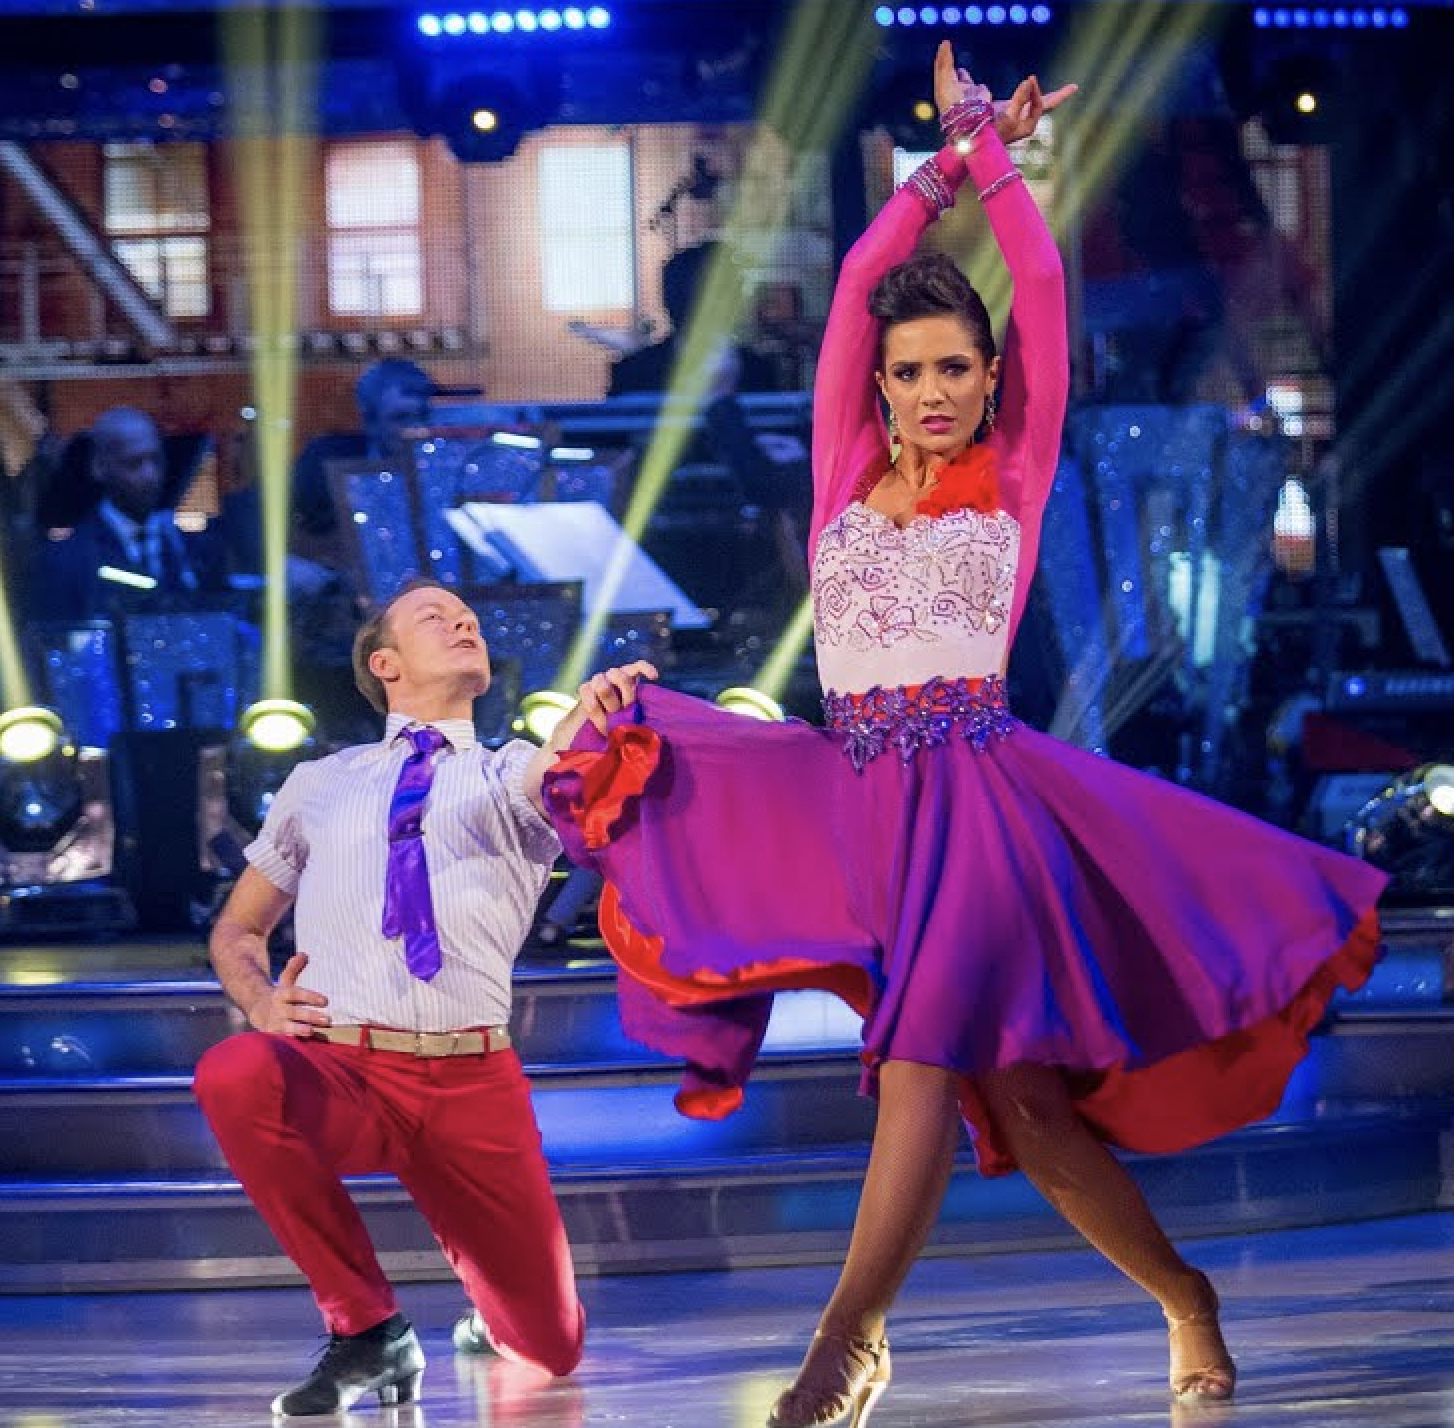 Frankie S CLub Juniors Taking The Dance Floor By Storm On Strictly Come Dancing